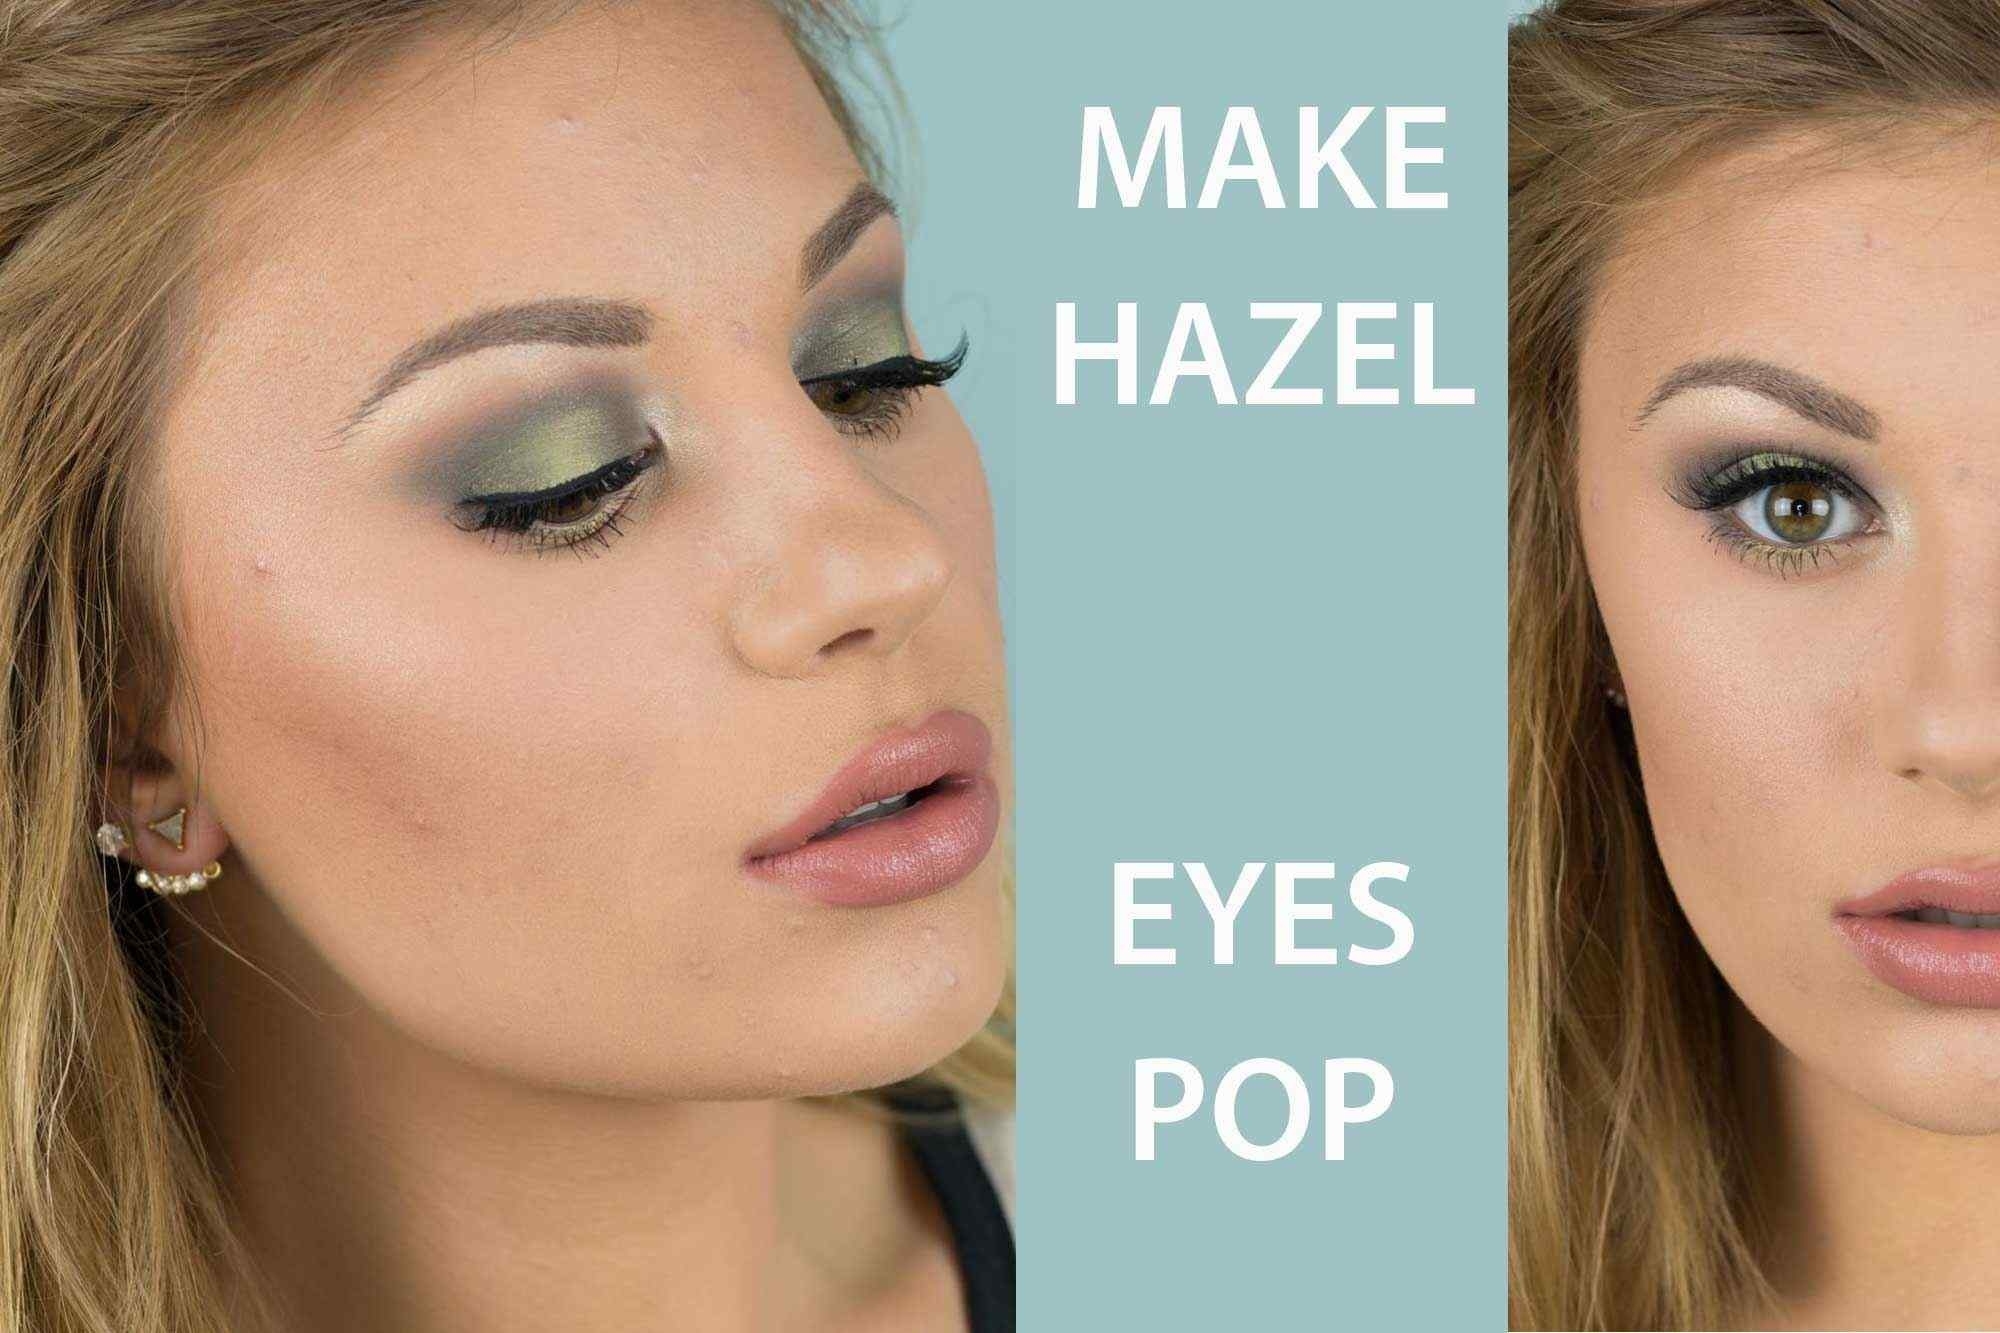 Eye Makeup Tips For Hazel Eyes And Blonde Hair | Saubhaya Makeup inside How To Do Makeup For Hazel Eyes And Blonde Hair